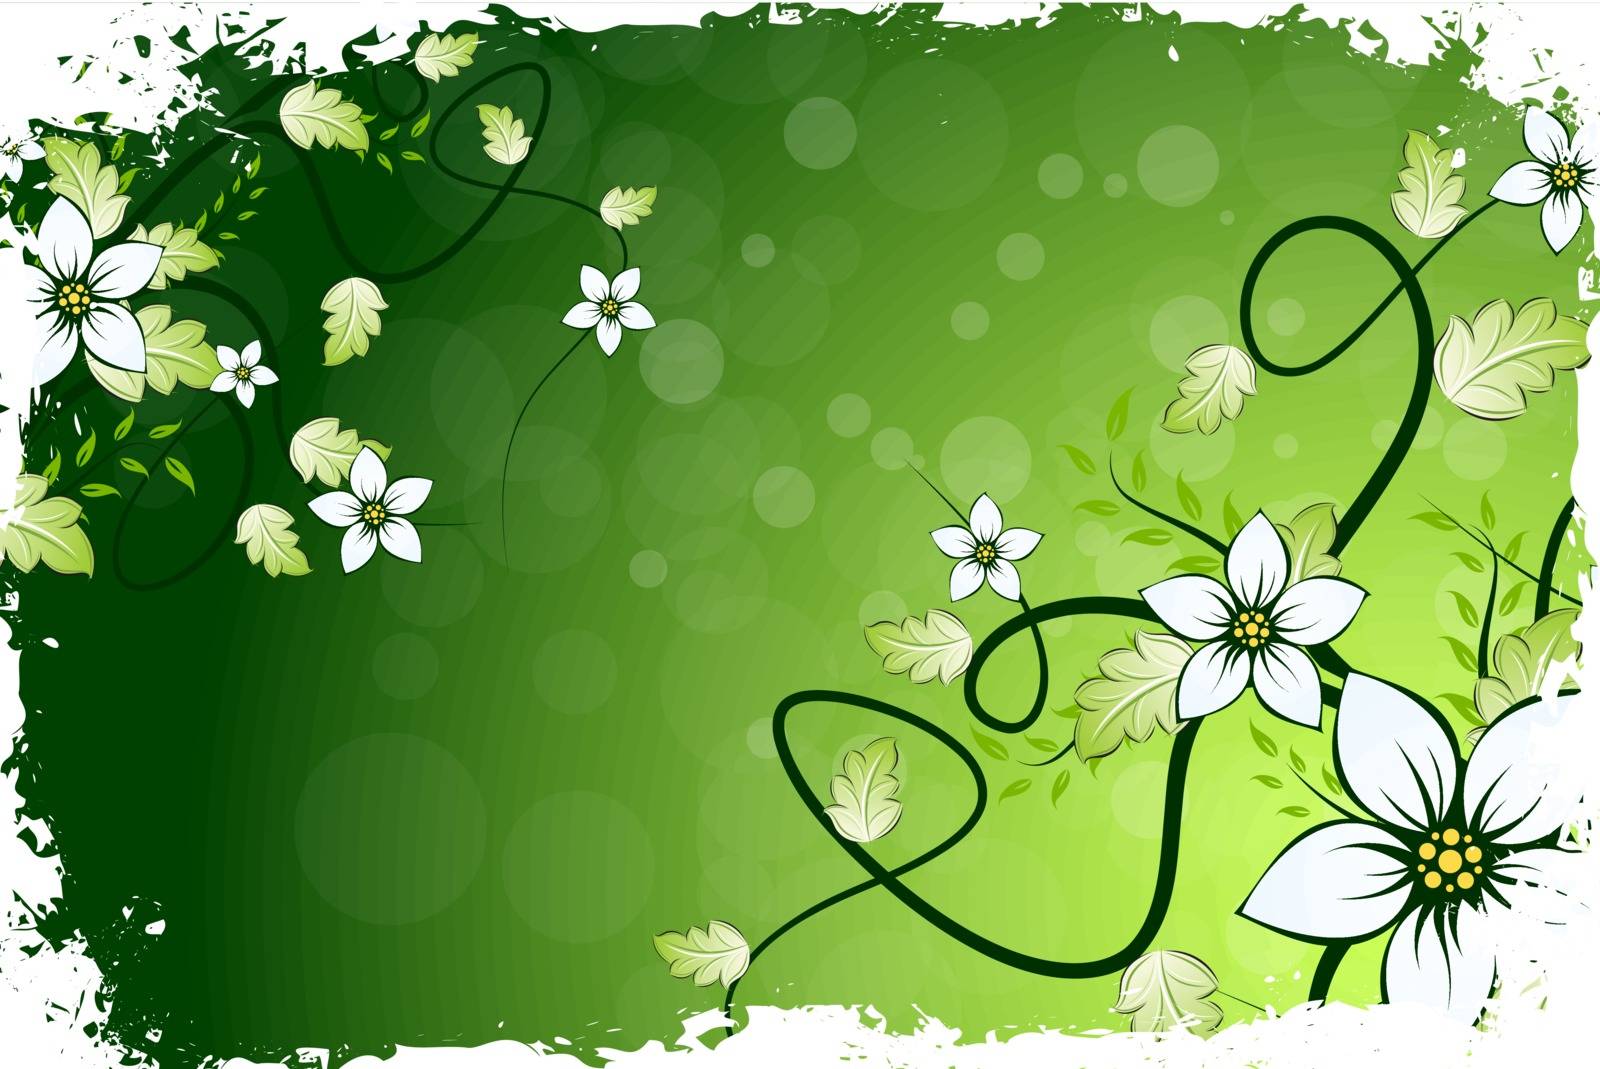 Grungy Flower Background by WaD